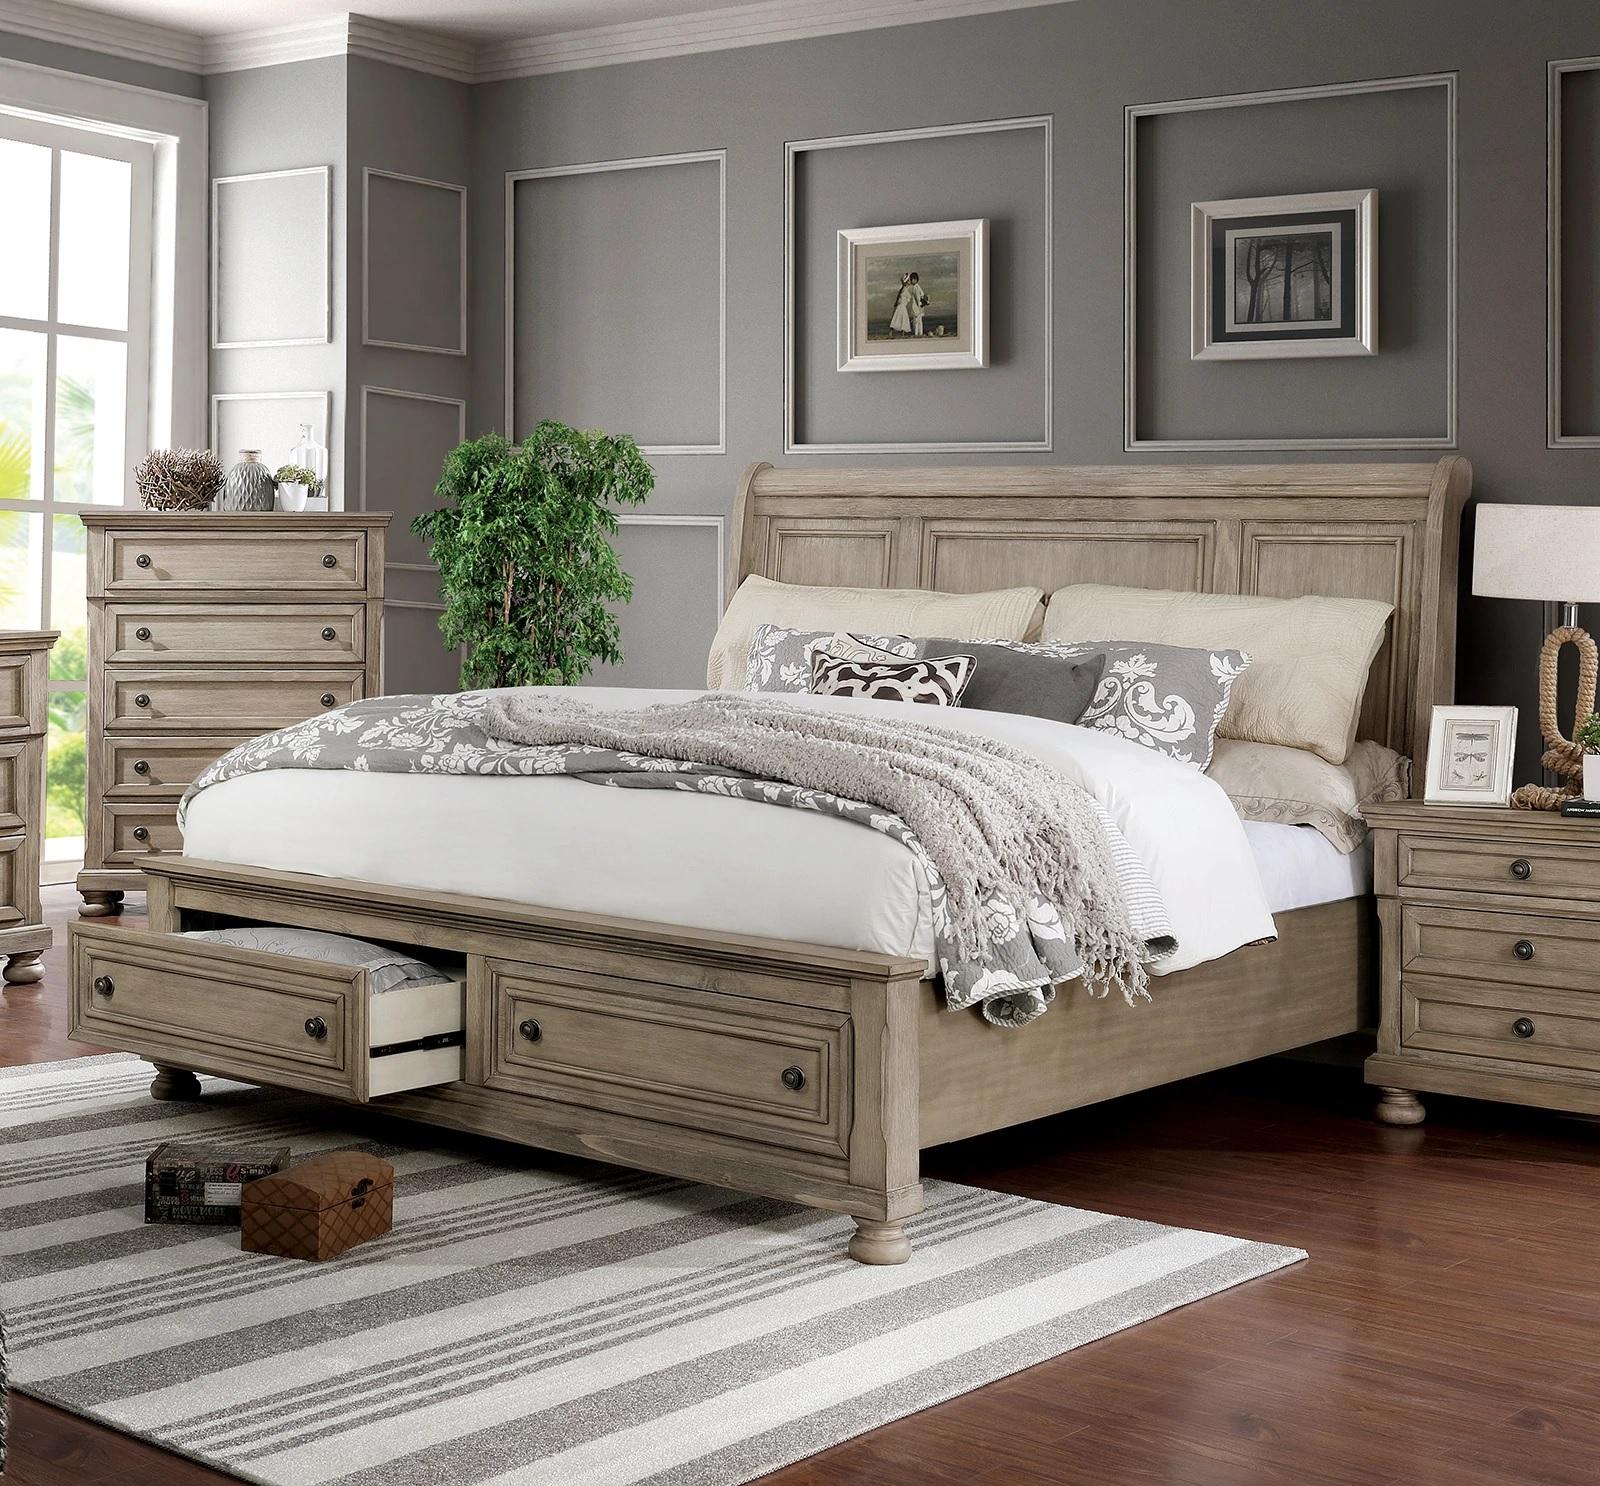 Transitional Storage Bed CM7568-CK Wells CM7568-CK in Gray 